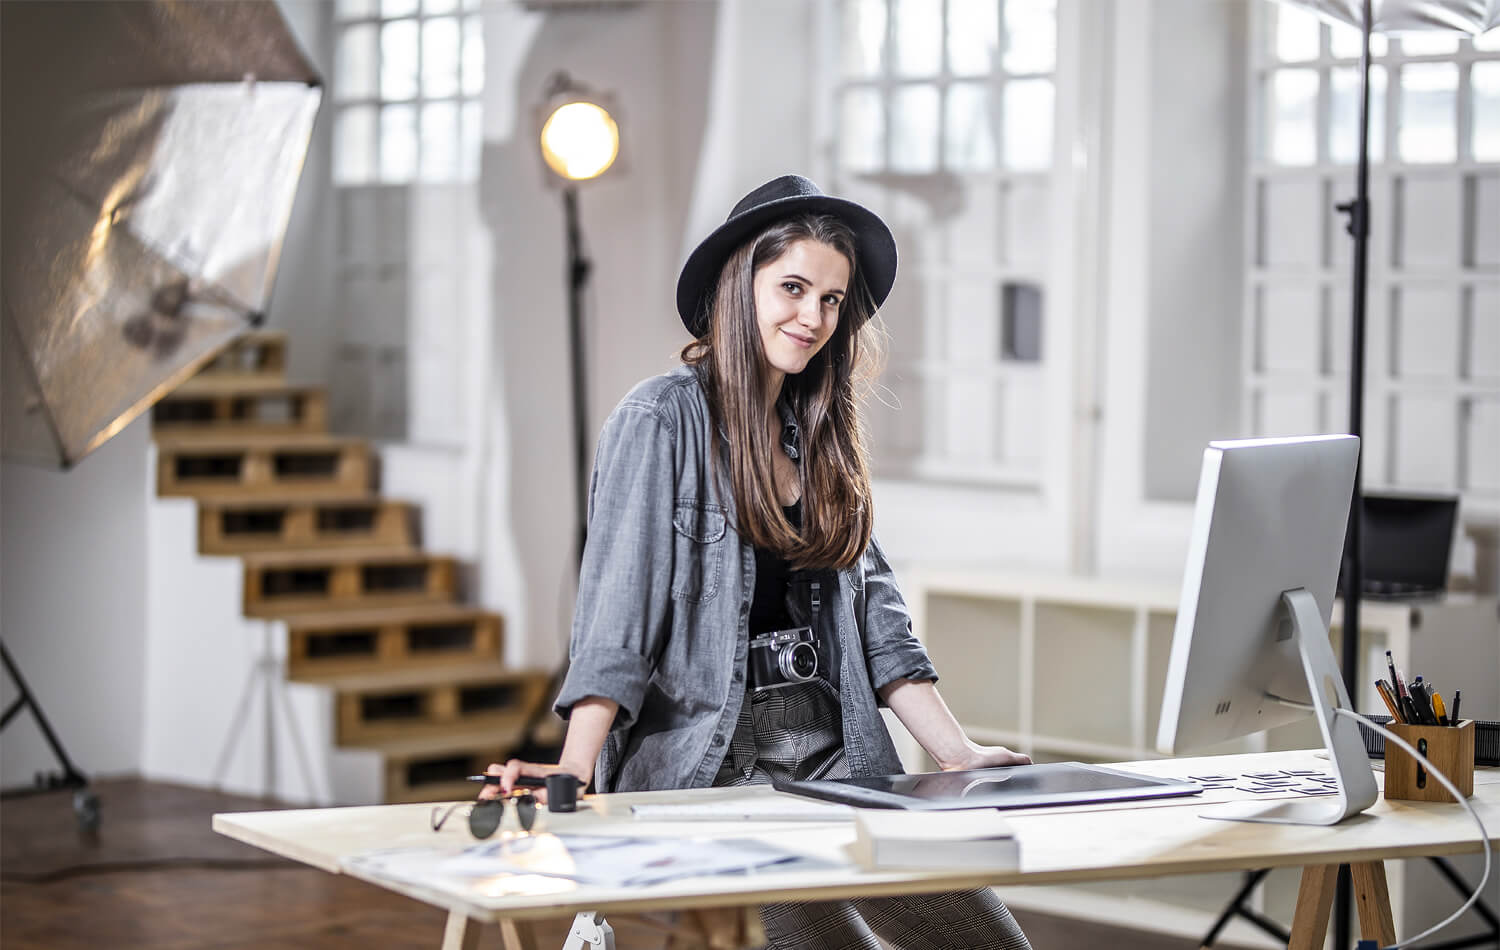 Woman designer standing next to a work table in a studio. Human factor drives innovation.